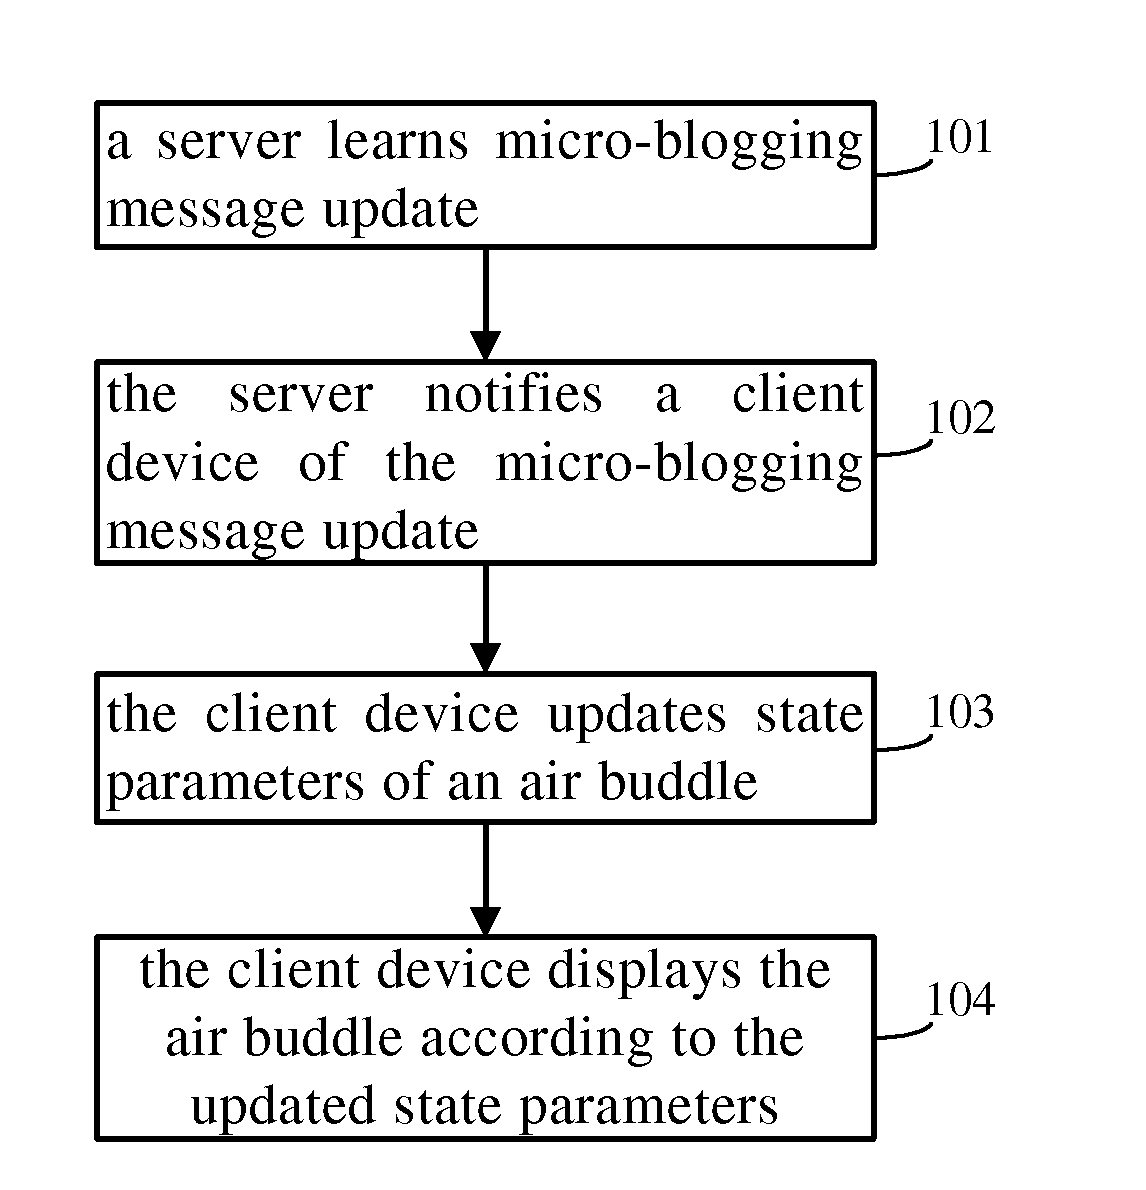 Prompting Method of Message Update and Network Client Device